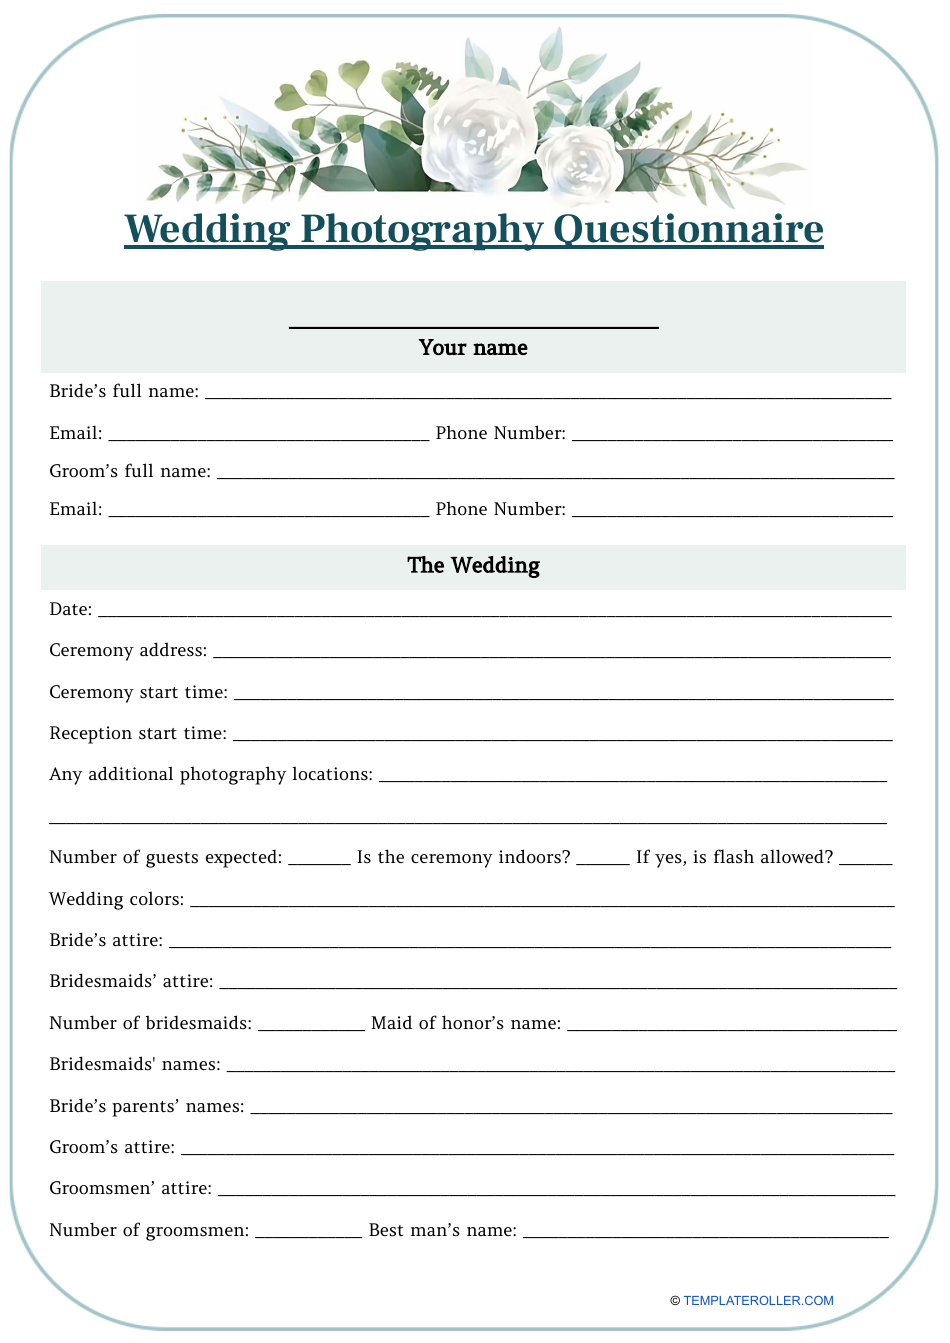 Wedding Photography Questionnaire Template Download Printable PDF